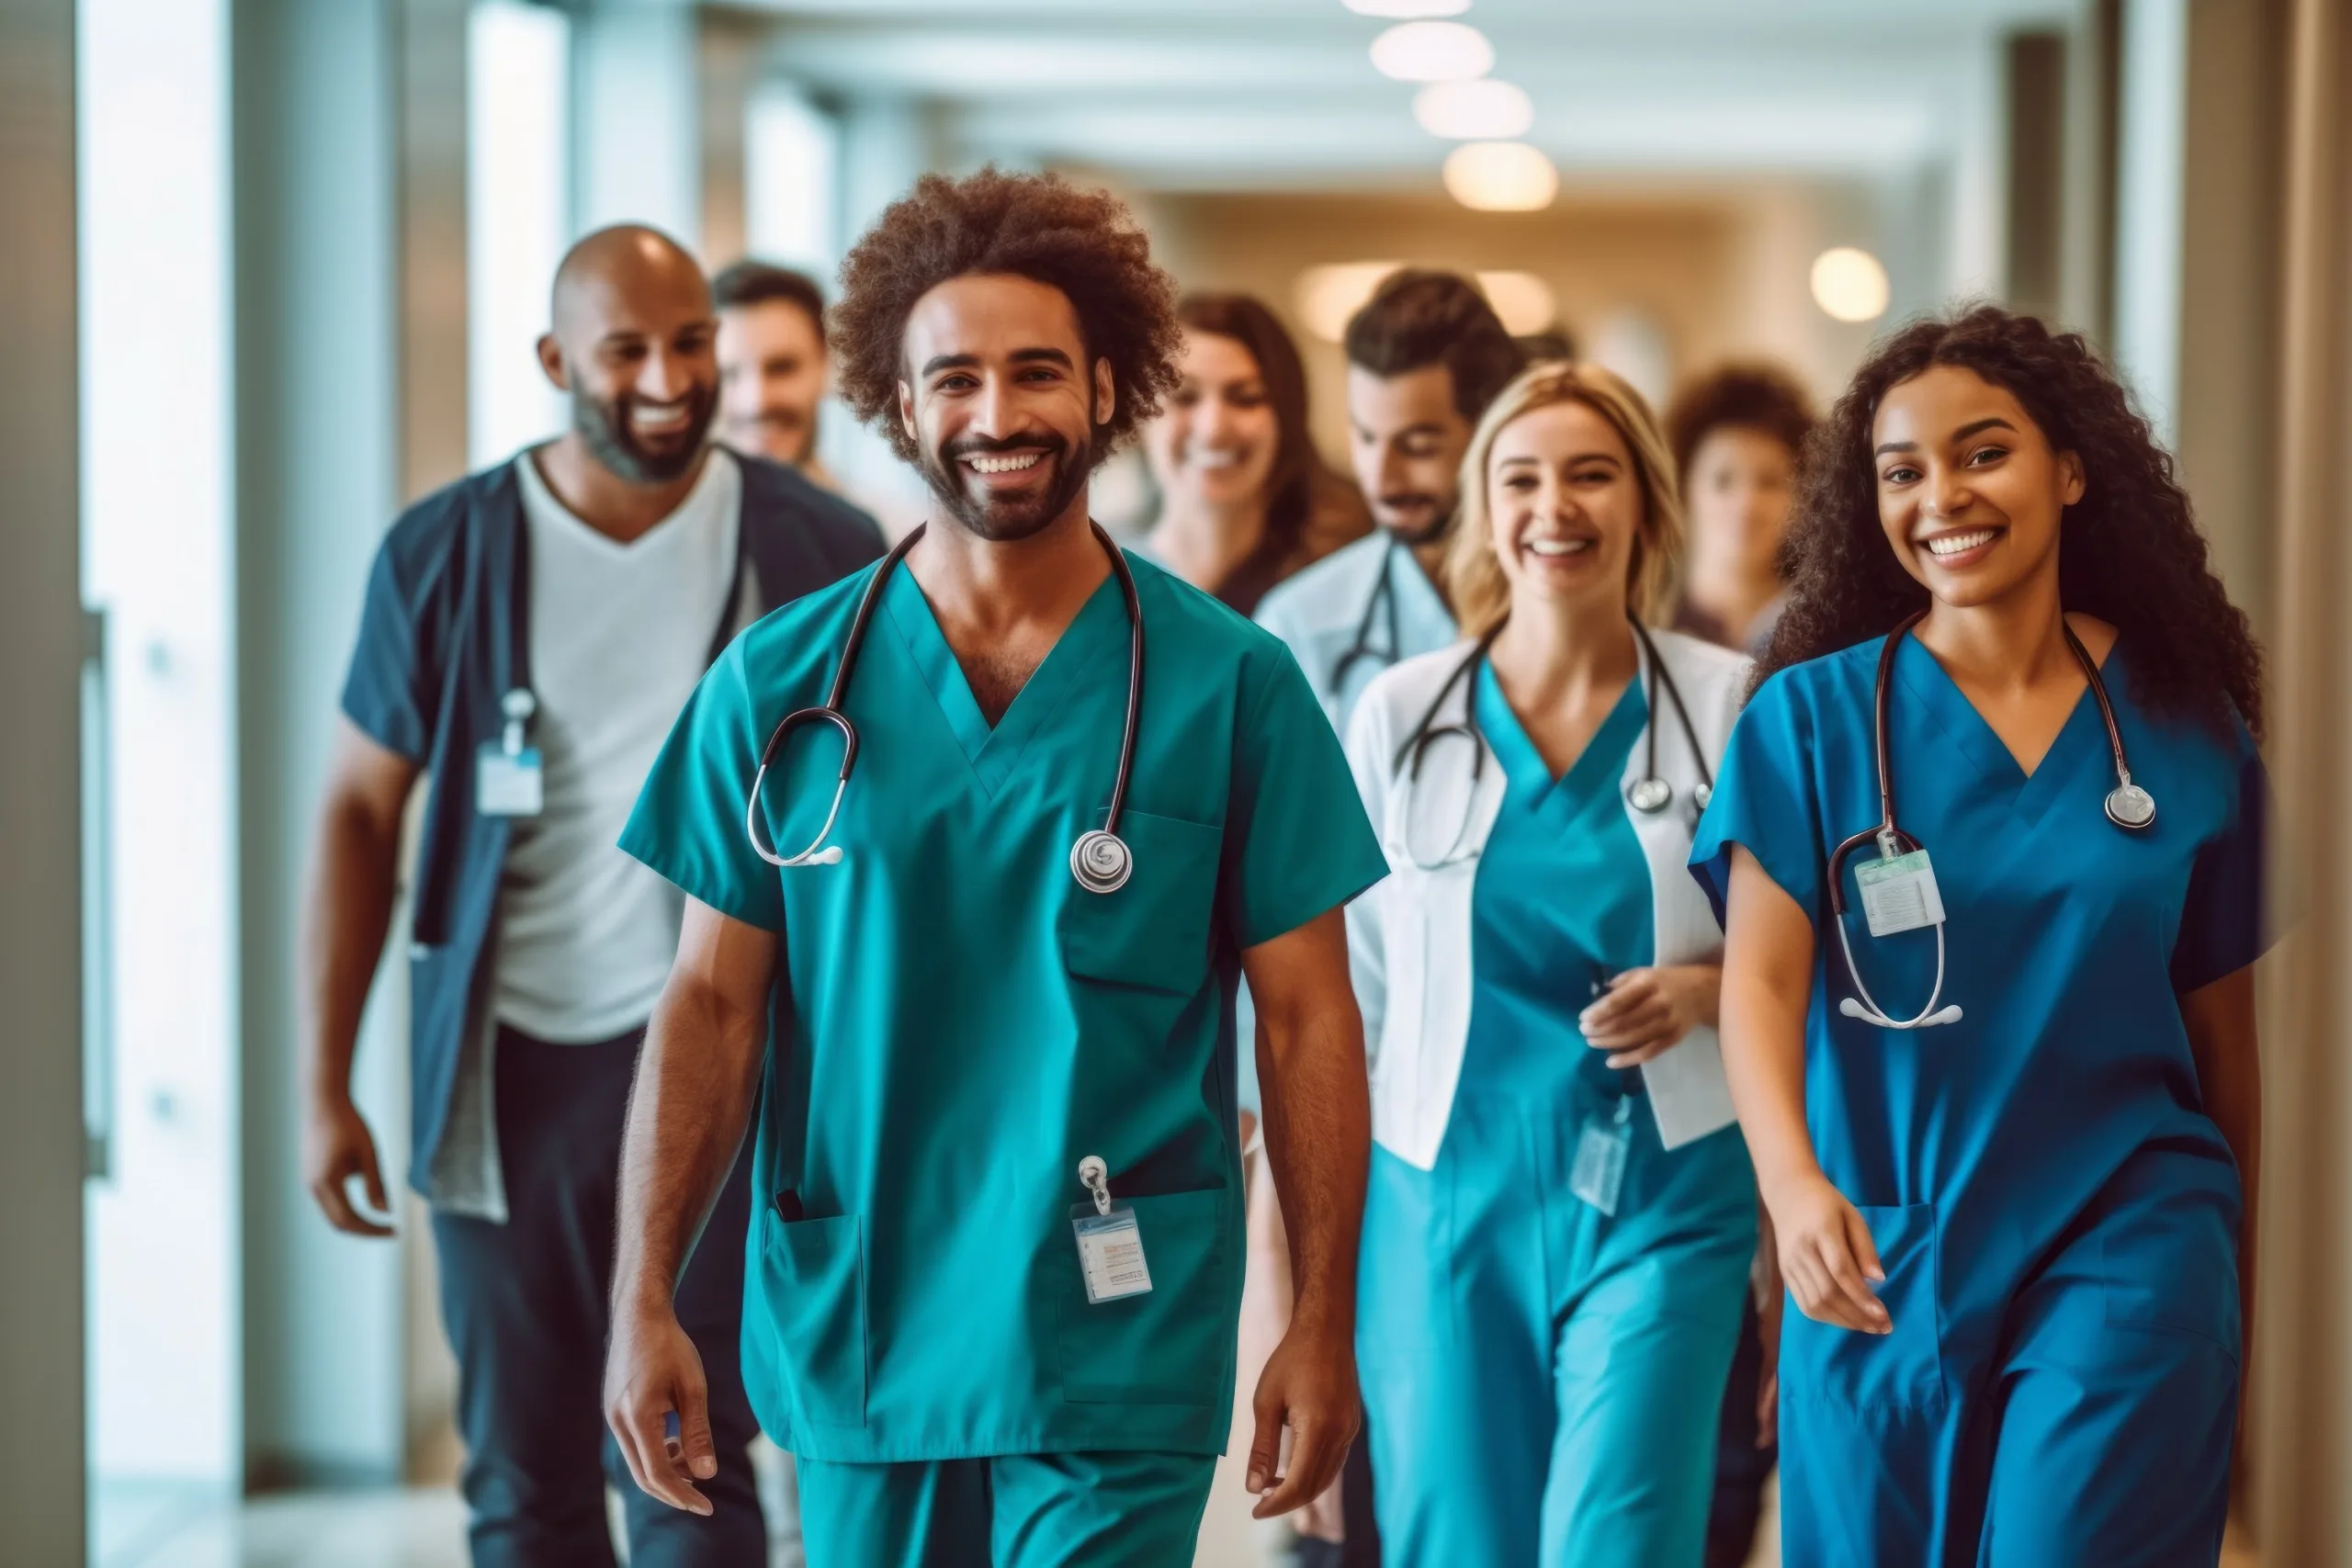 Group of doctors walking down hallway in the hospital smiling